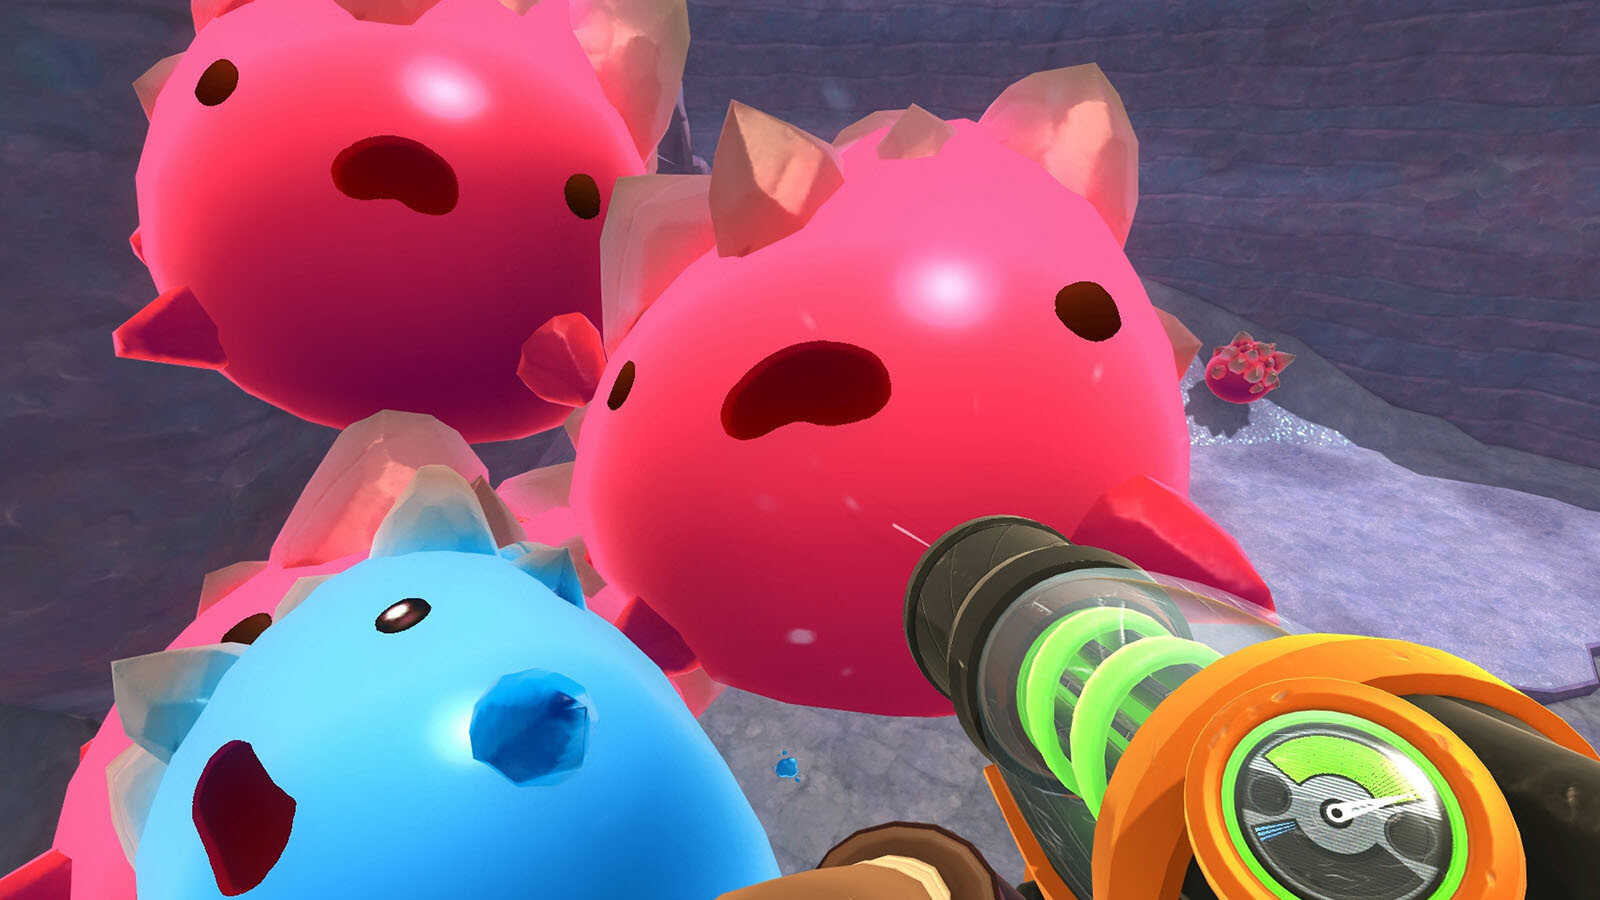 Slime Rancher system requirements